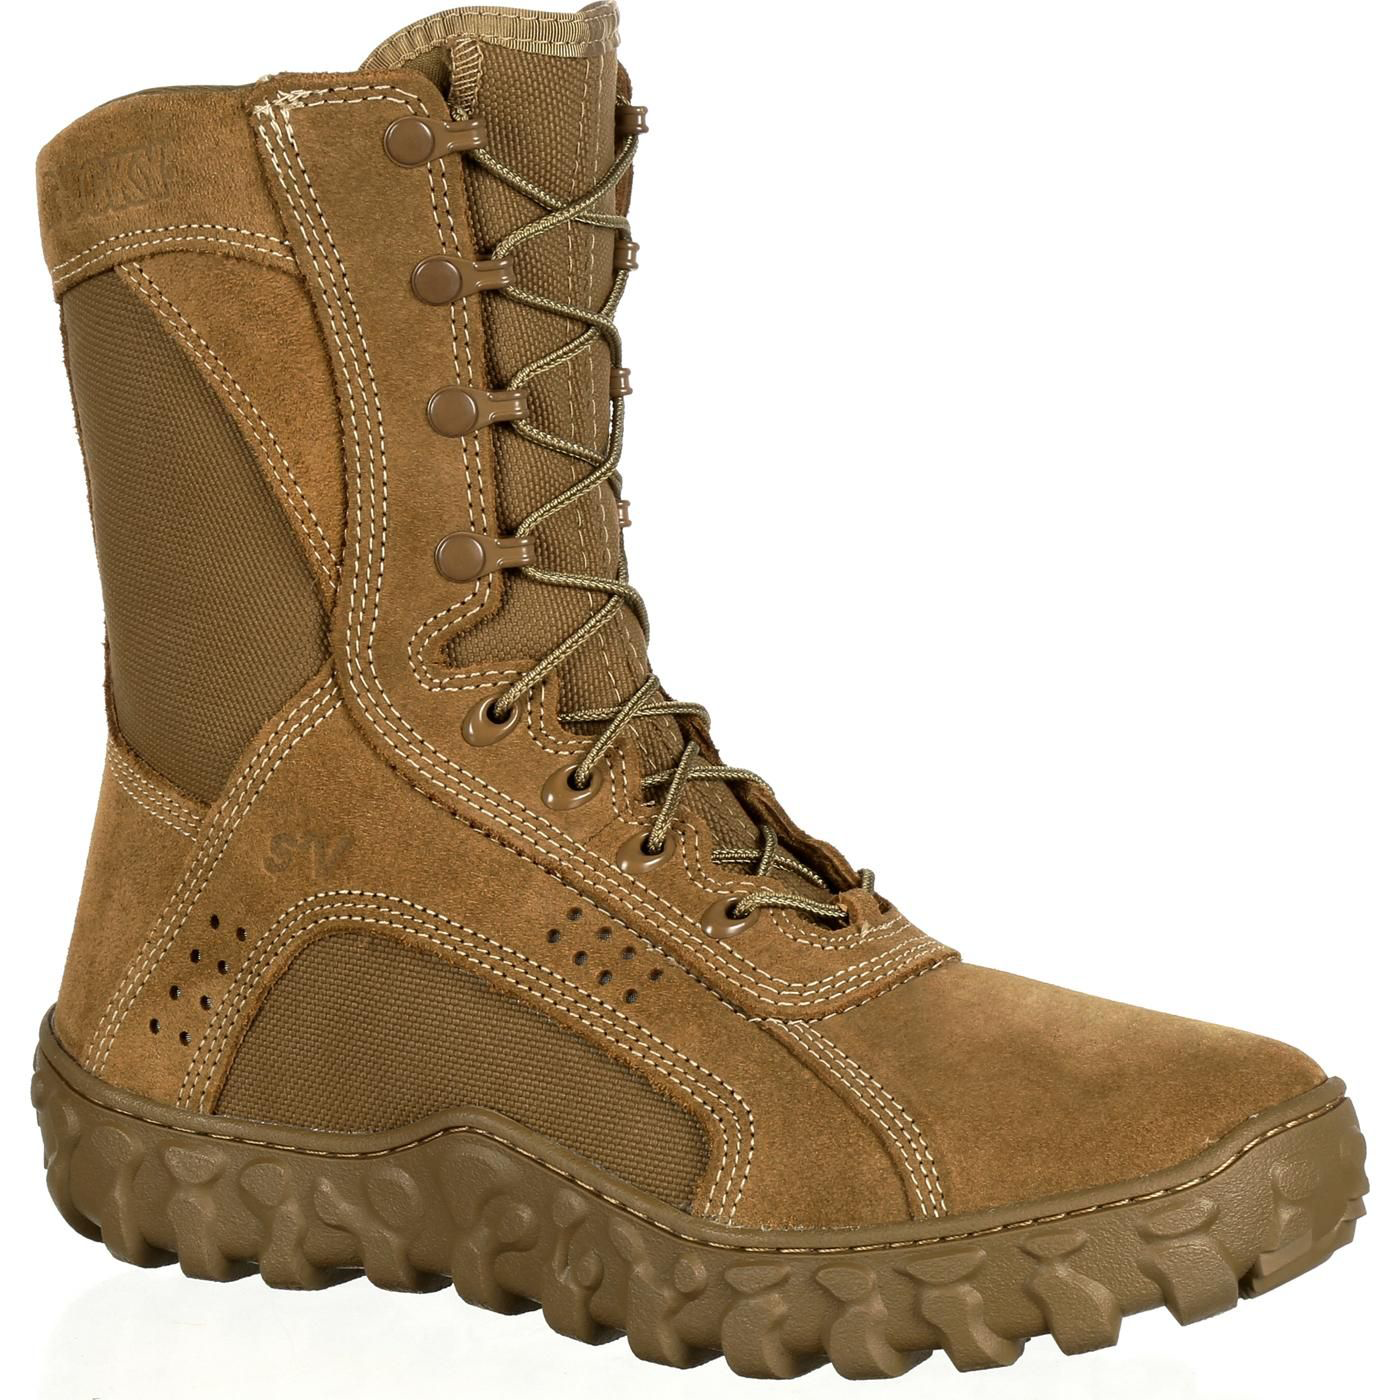 Rocky S2V Tactical Military Boots for Men - Coyote Brown - 11.5M